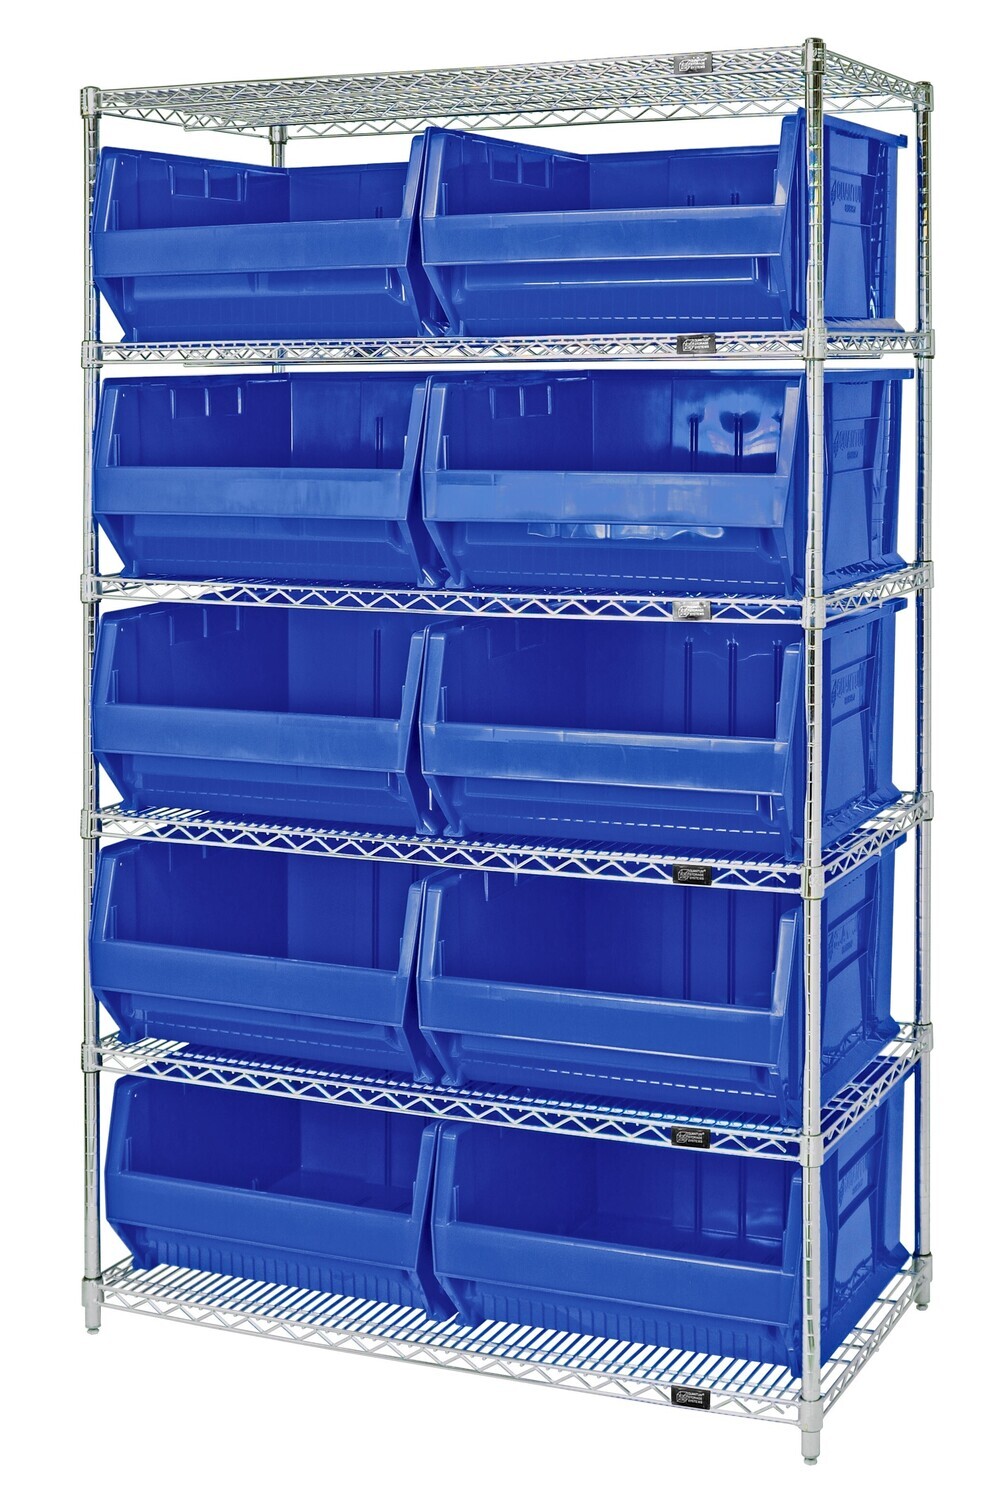 WR6-957 - Wire shelving with bins